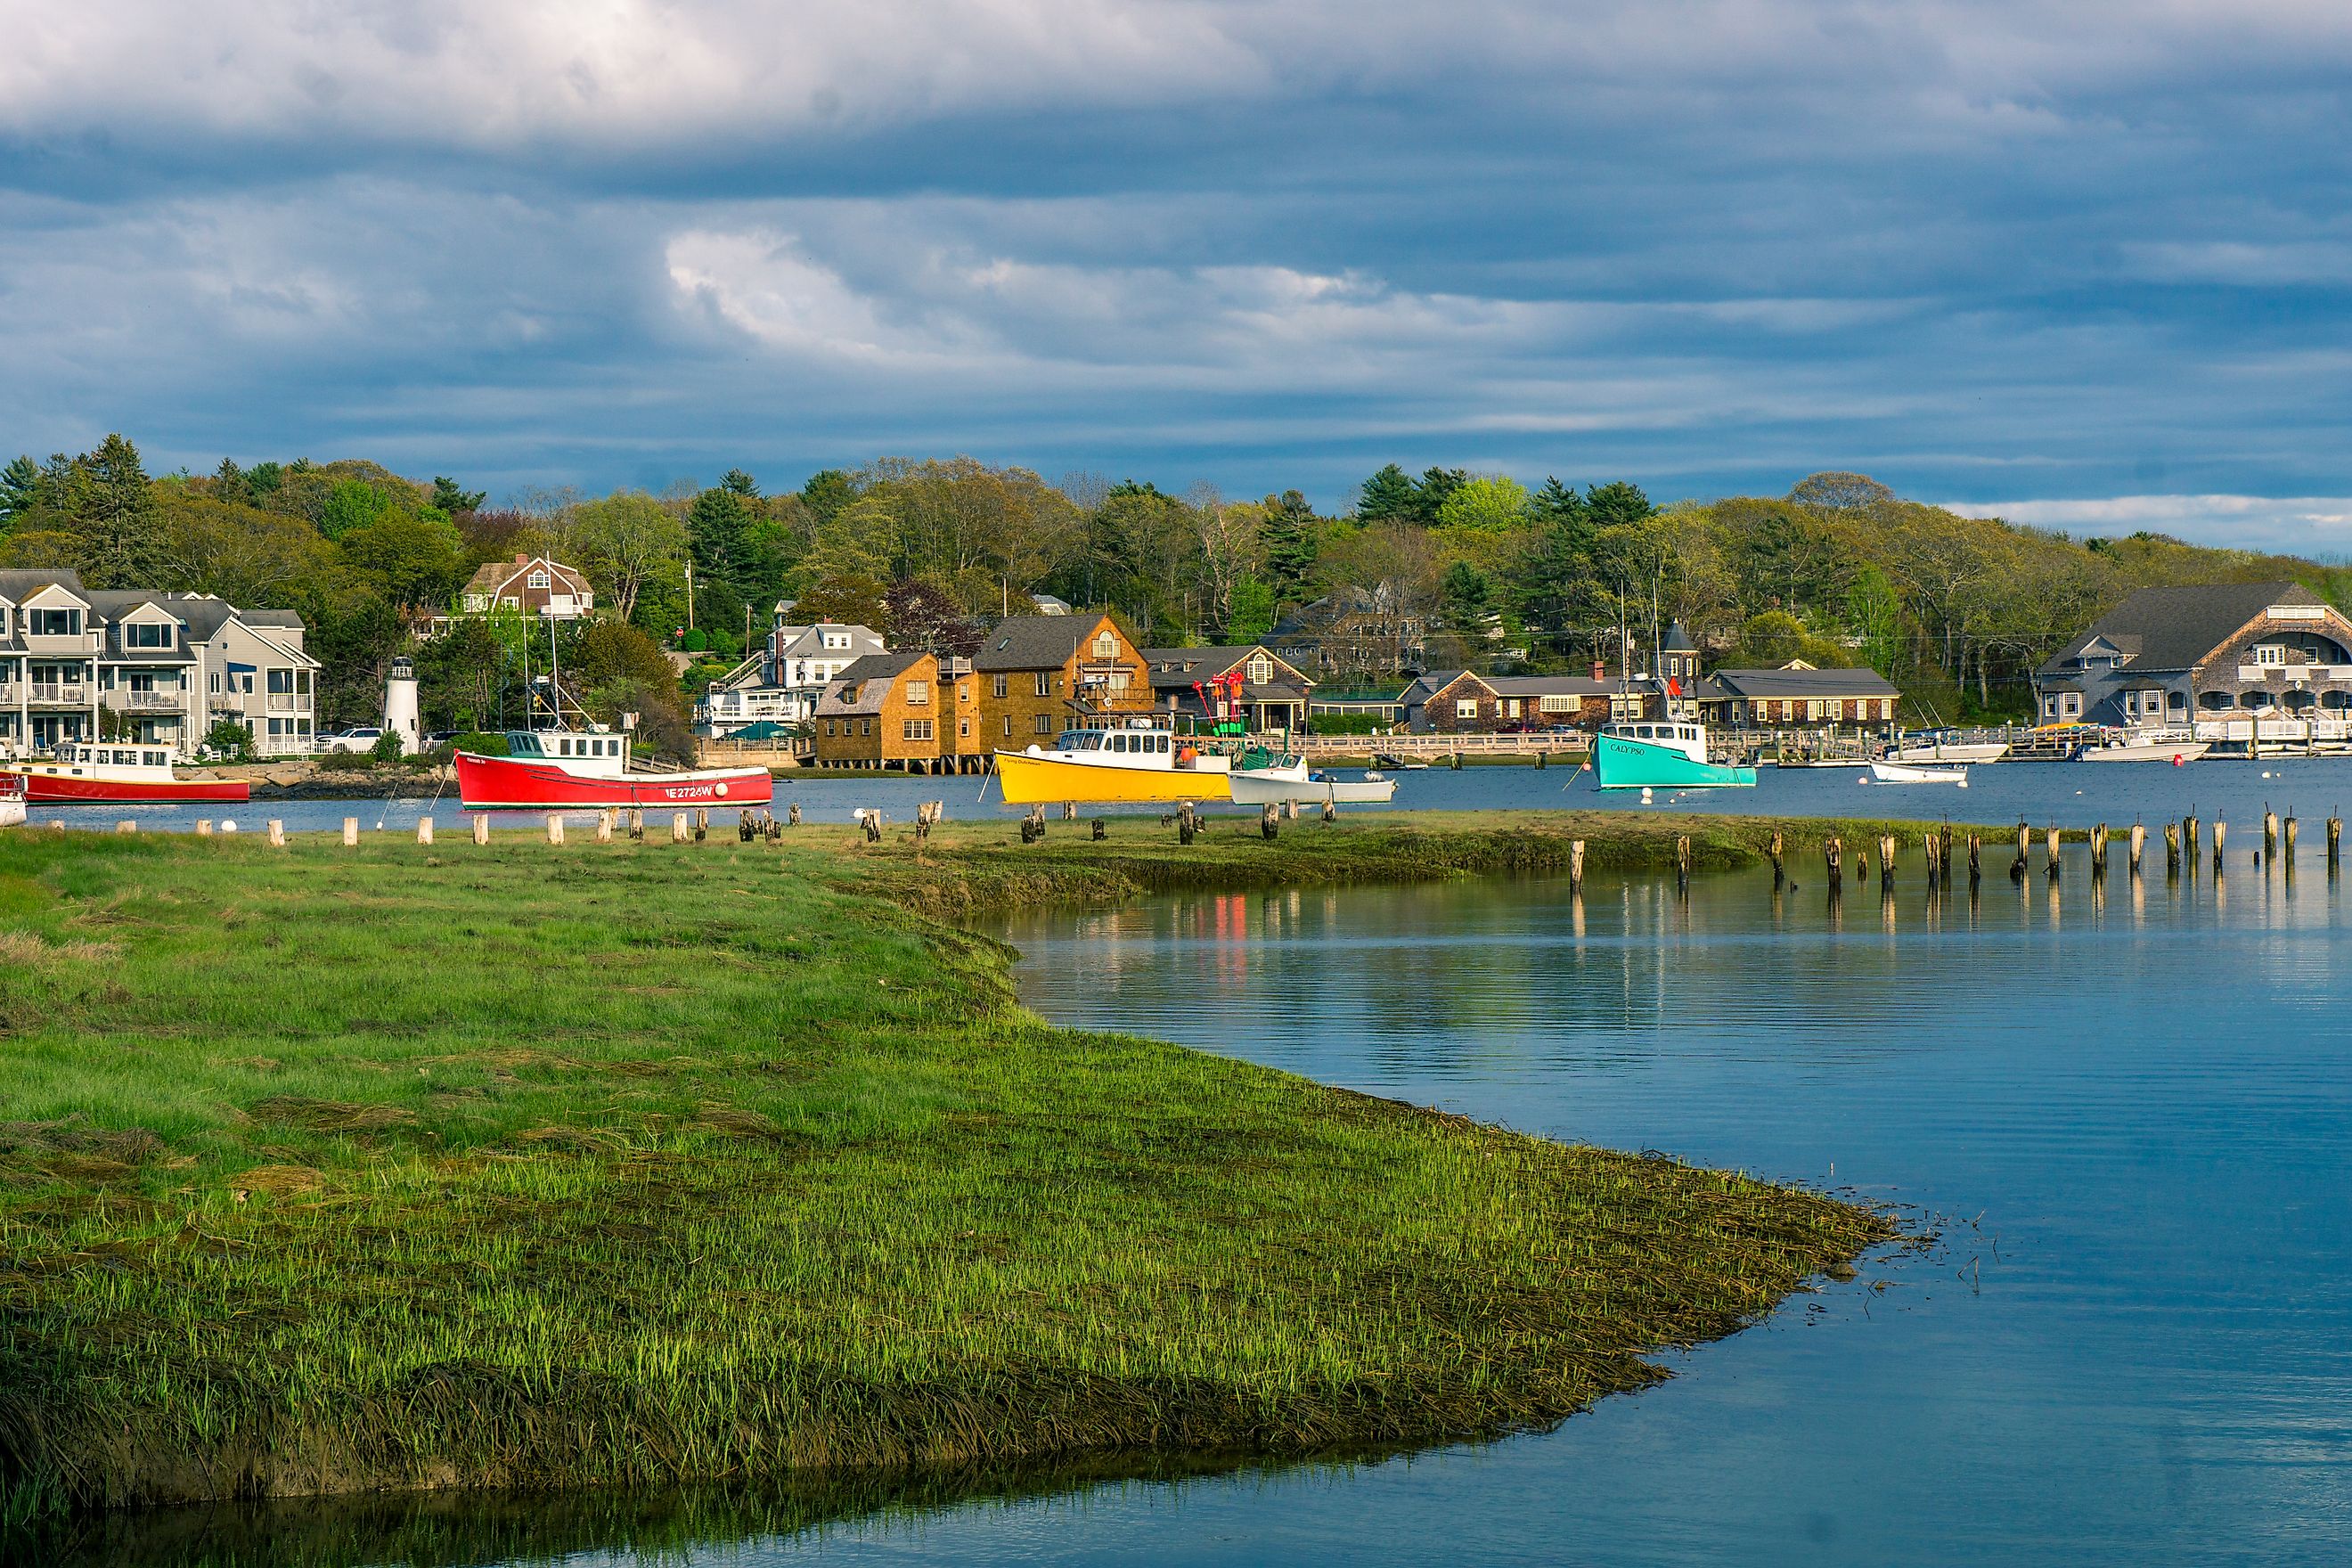 The gorgeous town of Kennebunkport, Maine.